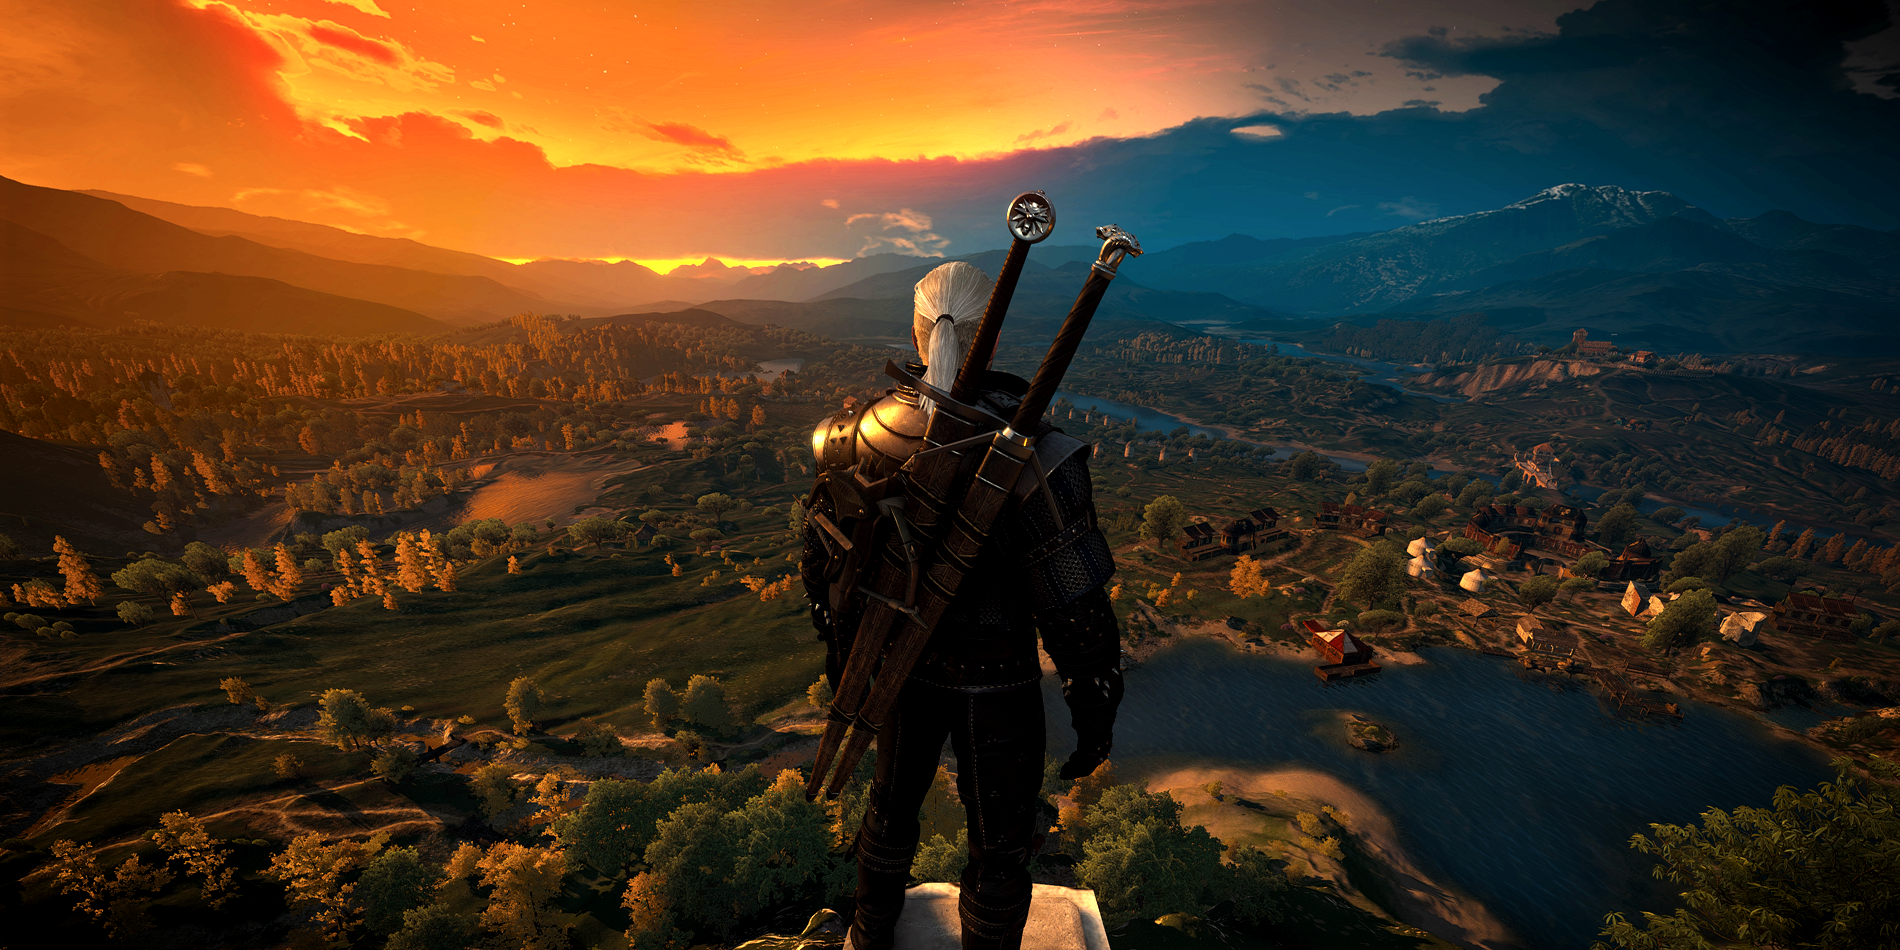 Geralt stands elevated looking down on the world at sunset, Witcher 3